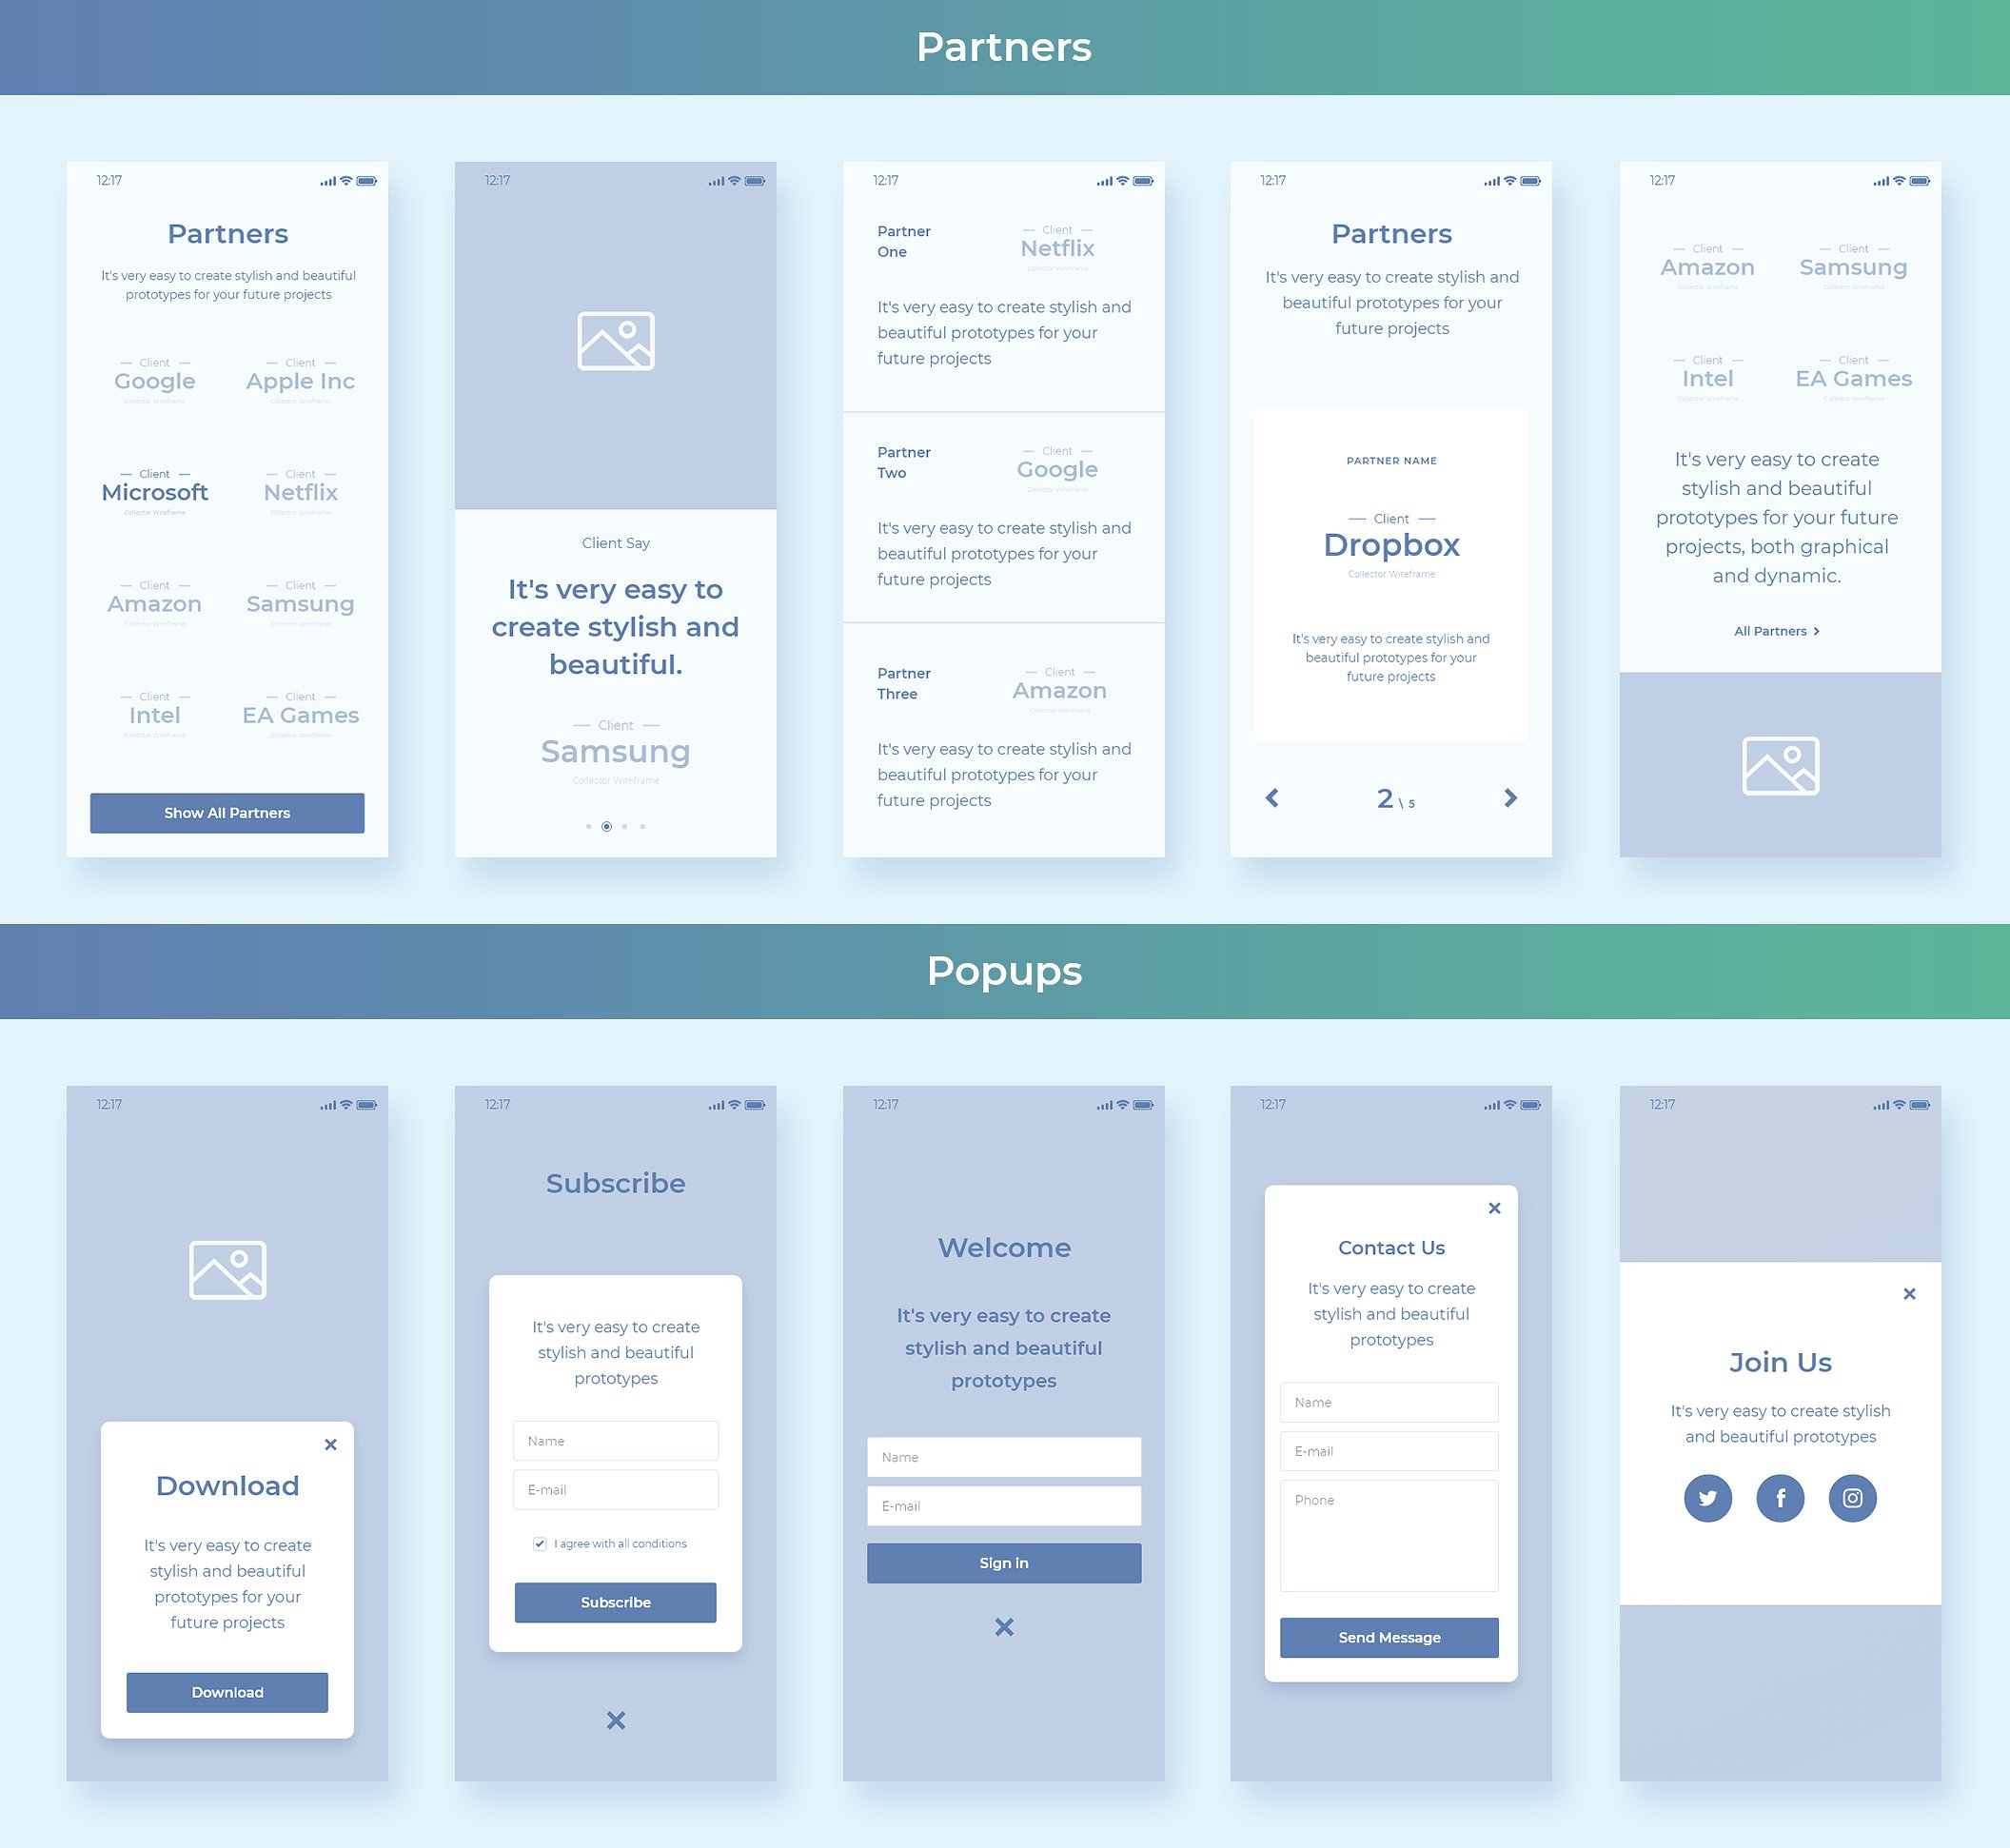 Collector iOS Wireframe UI Kit